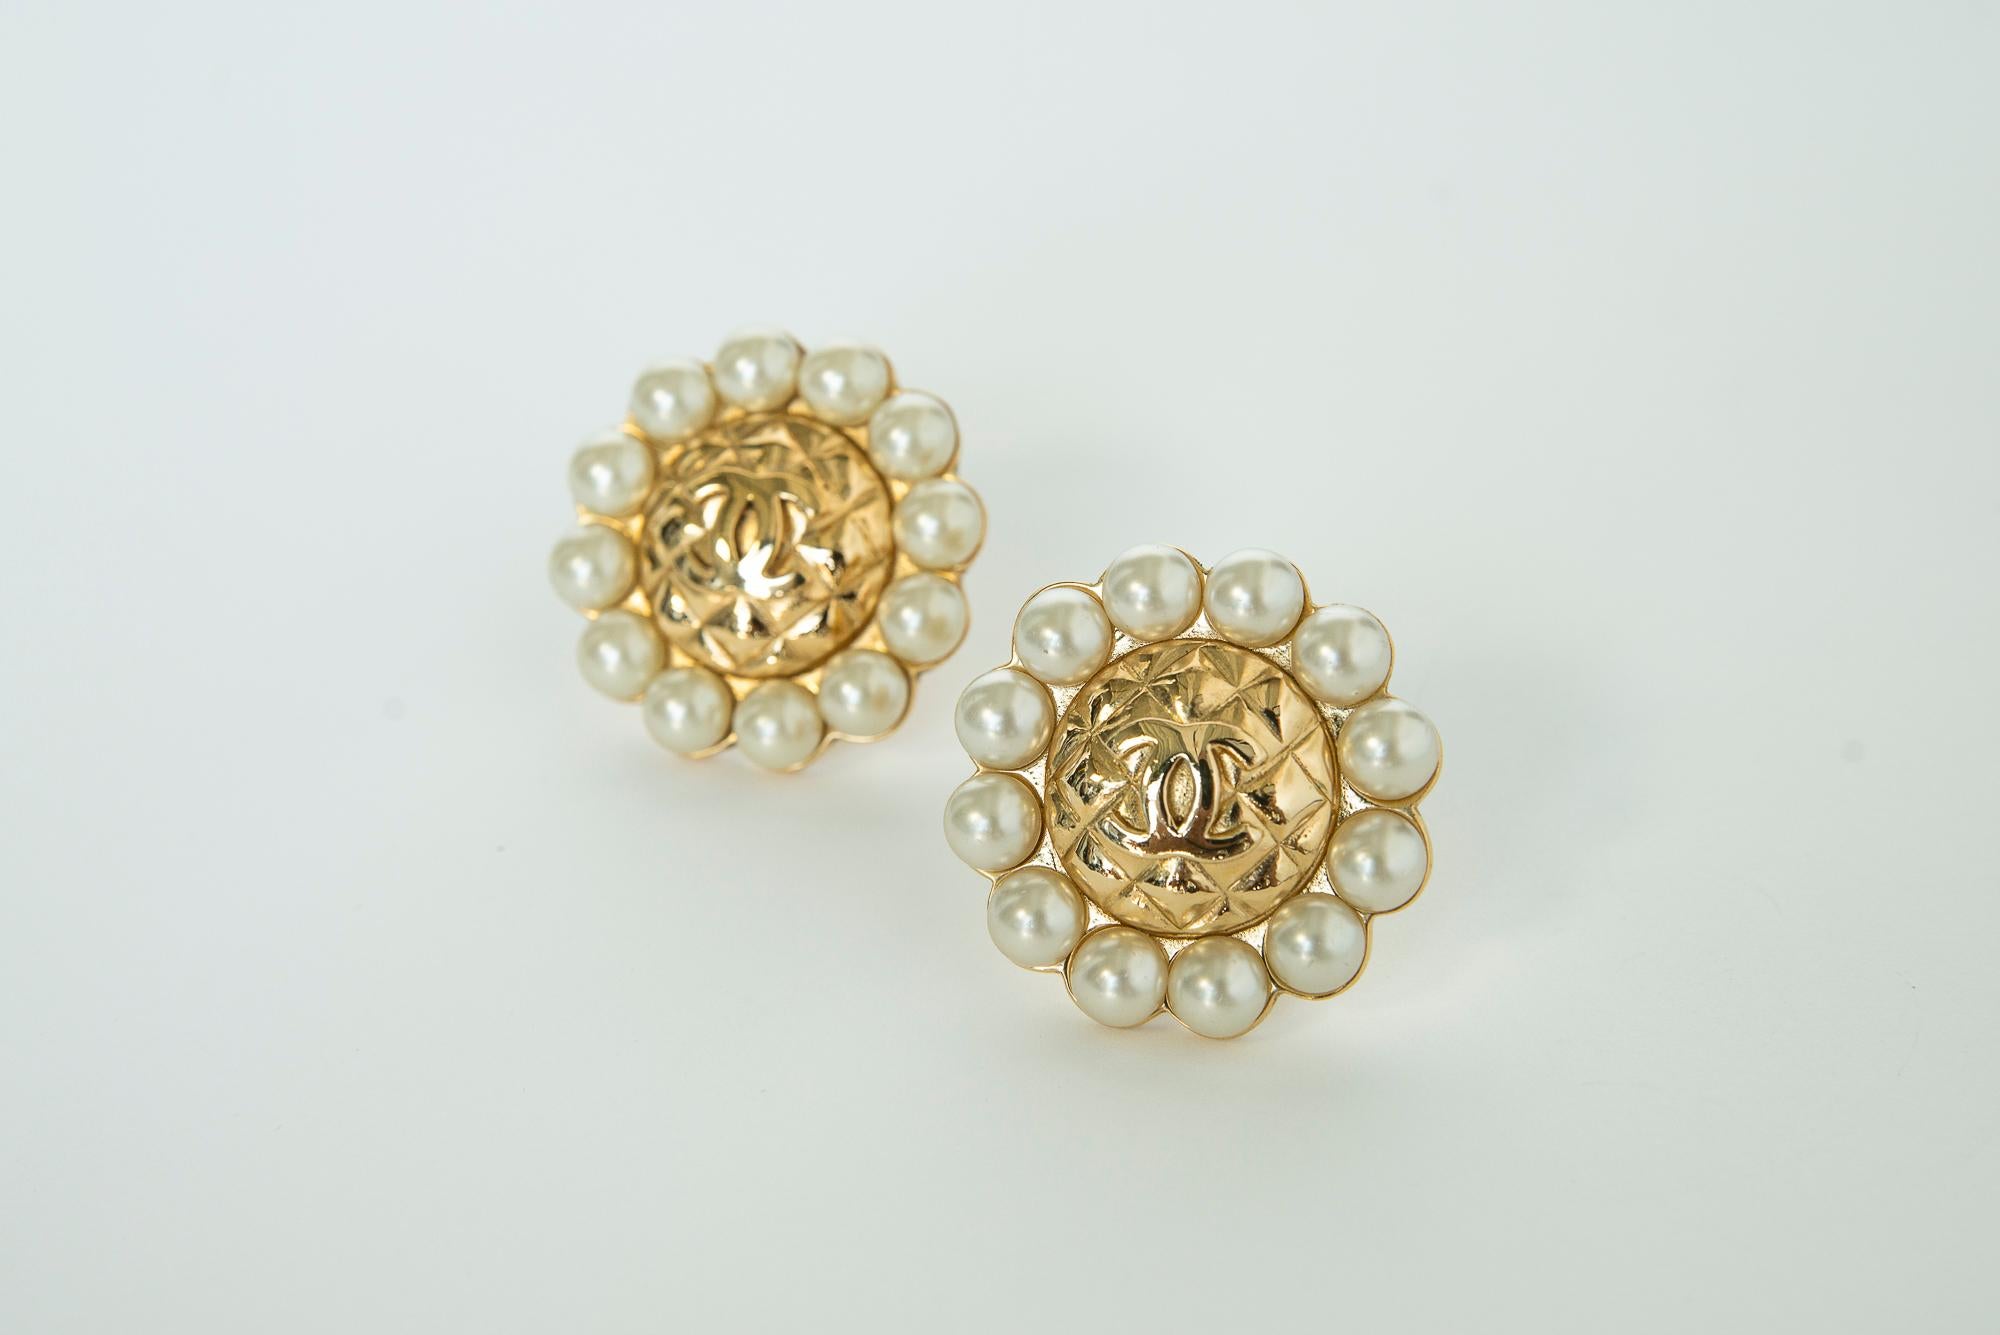 Chanel By Karl Lagerfeld Oversized Gold-Tone & Faux Pearls CC Clip-On Earrings For Sale 1